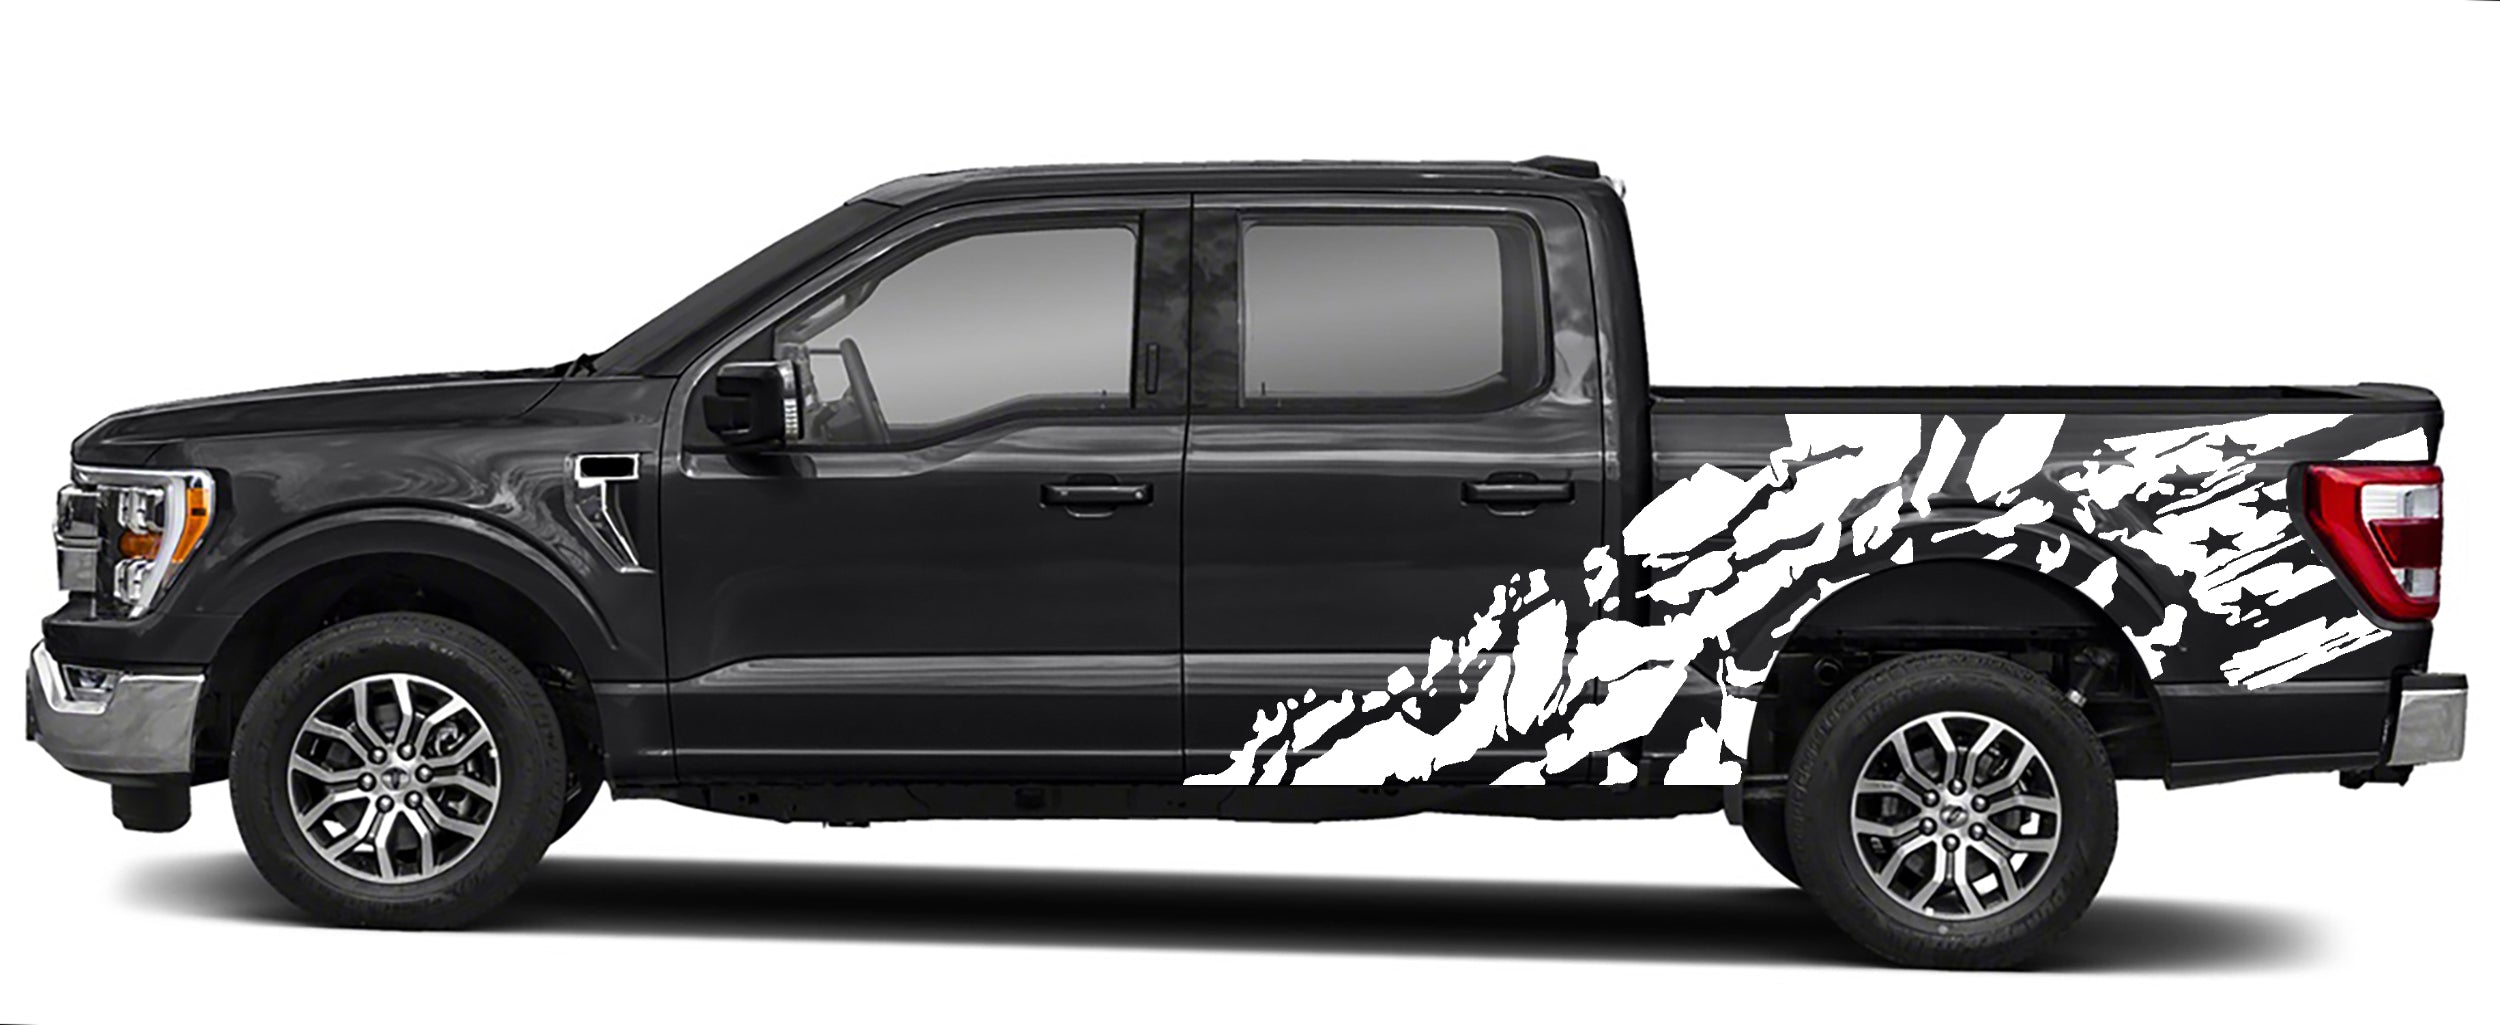 shredded american flag side graphics for ford f 150 2021 to 2023 models white